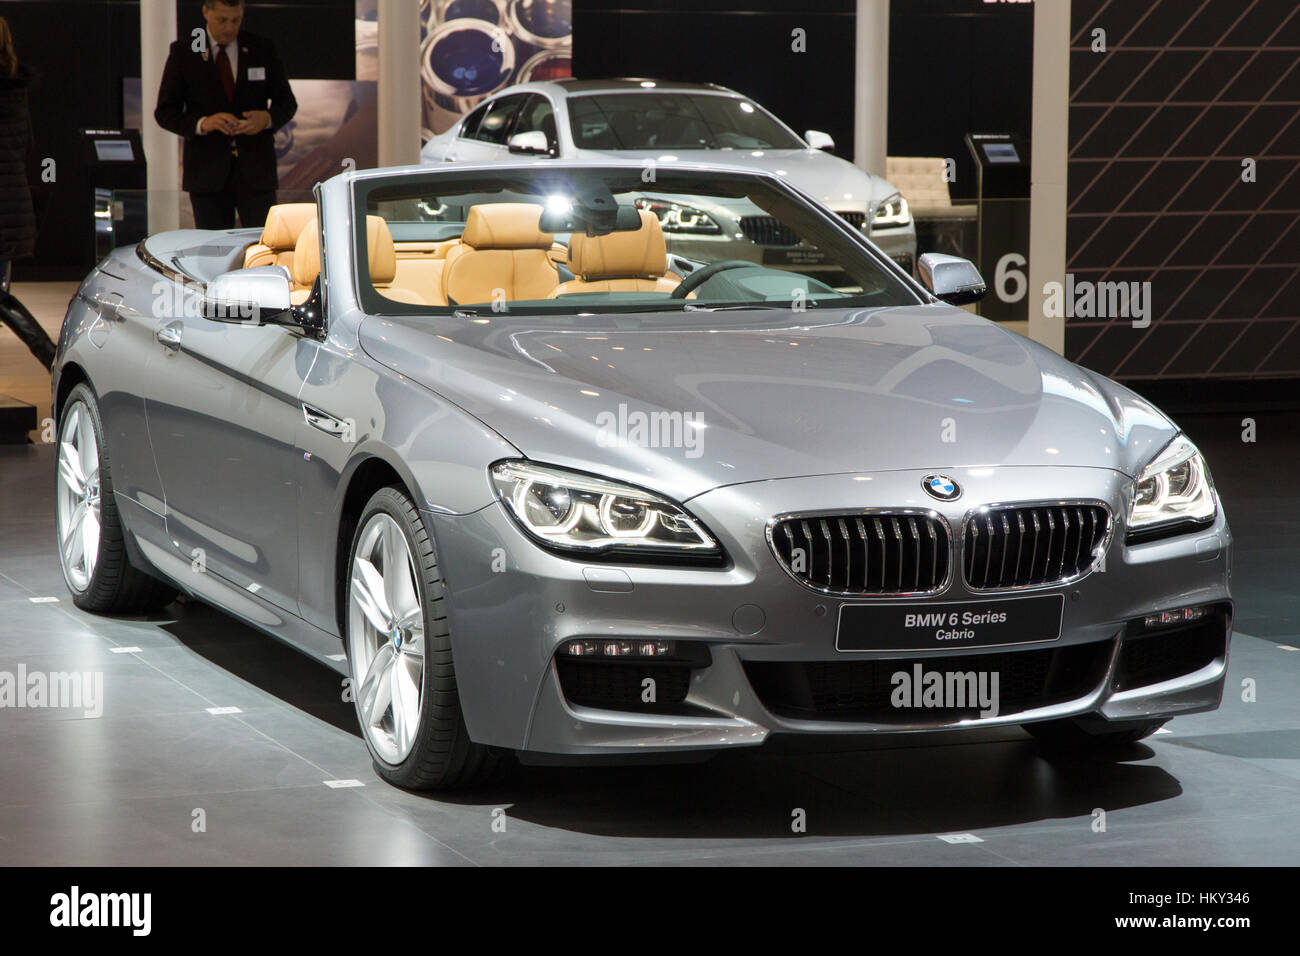 BRUSSELS - JAN 12, 2016: BMW 6 series Cabrio on display at the Brussels Motor Show. Stock Photo